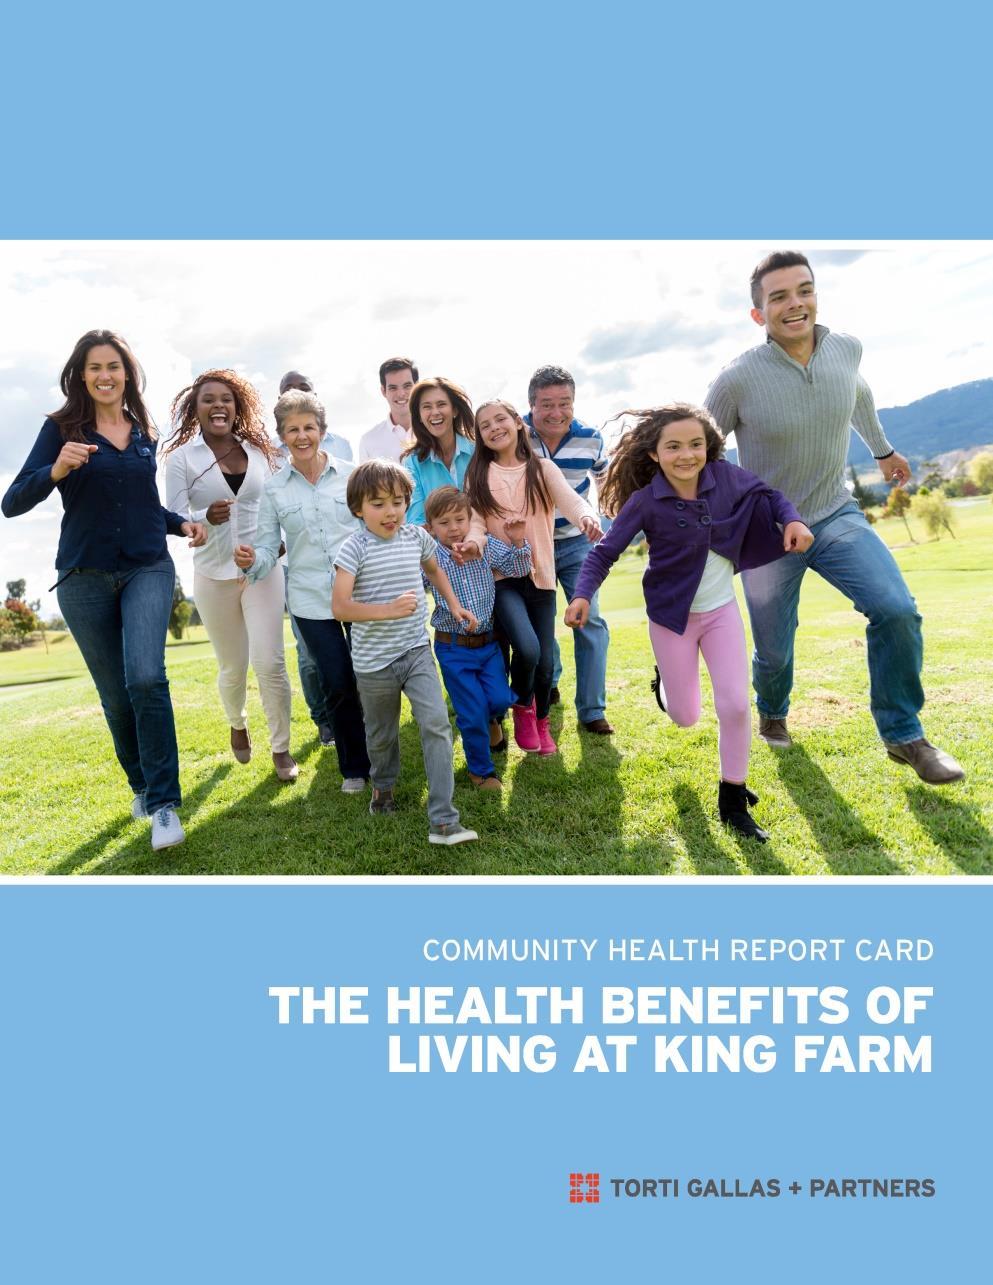 Community Health Report Card A Case Study and Tool for